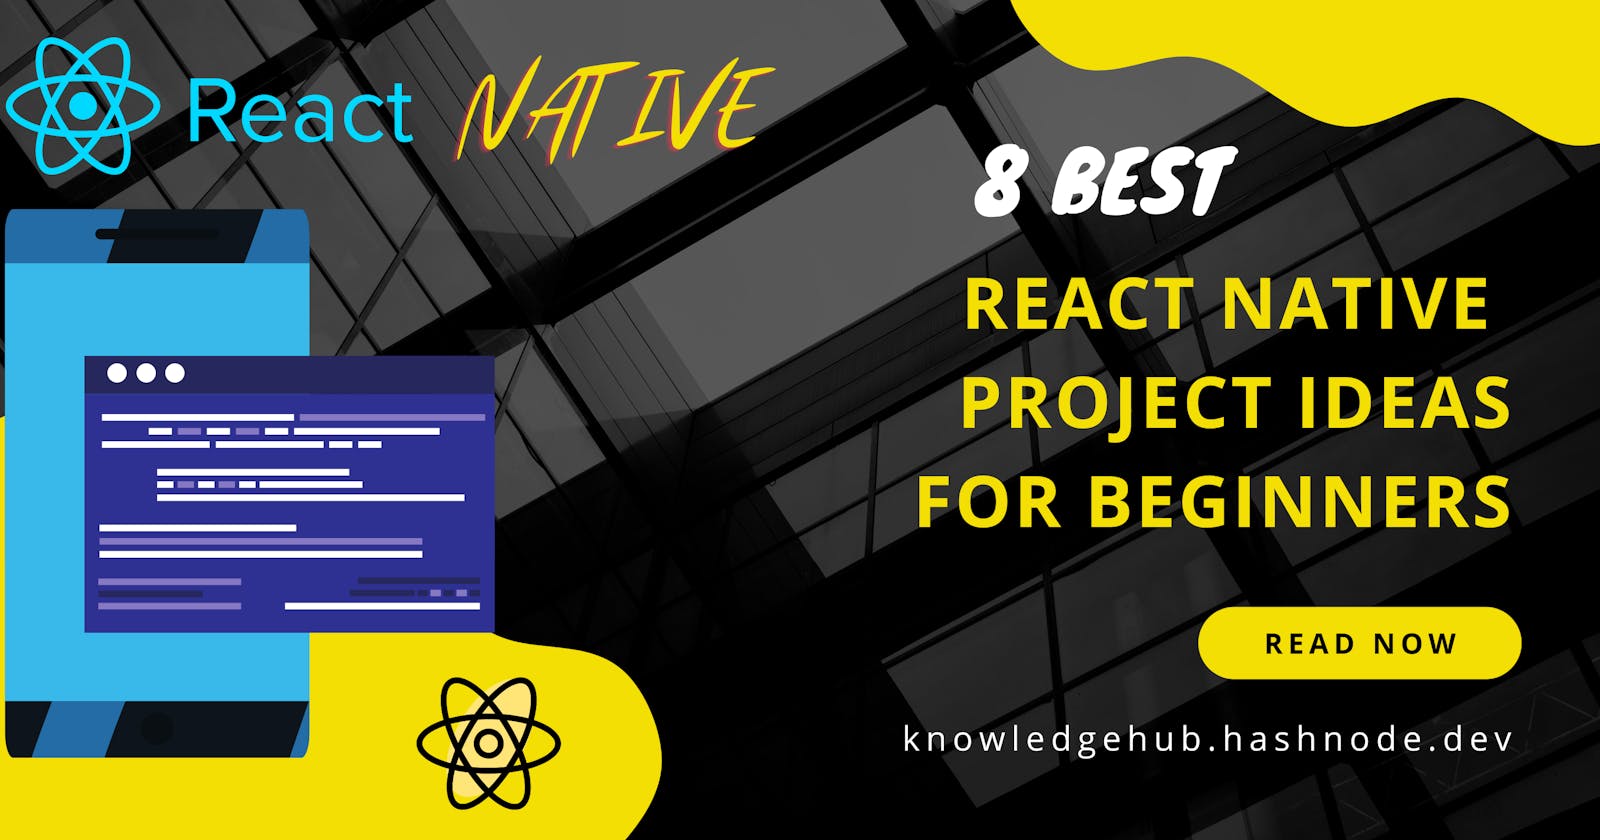 8 Best React Native Project Ideas for Beginners